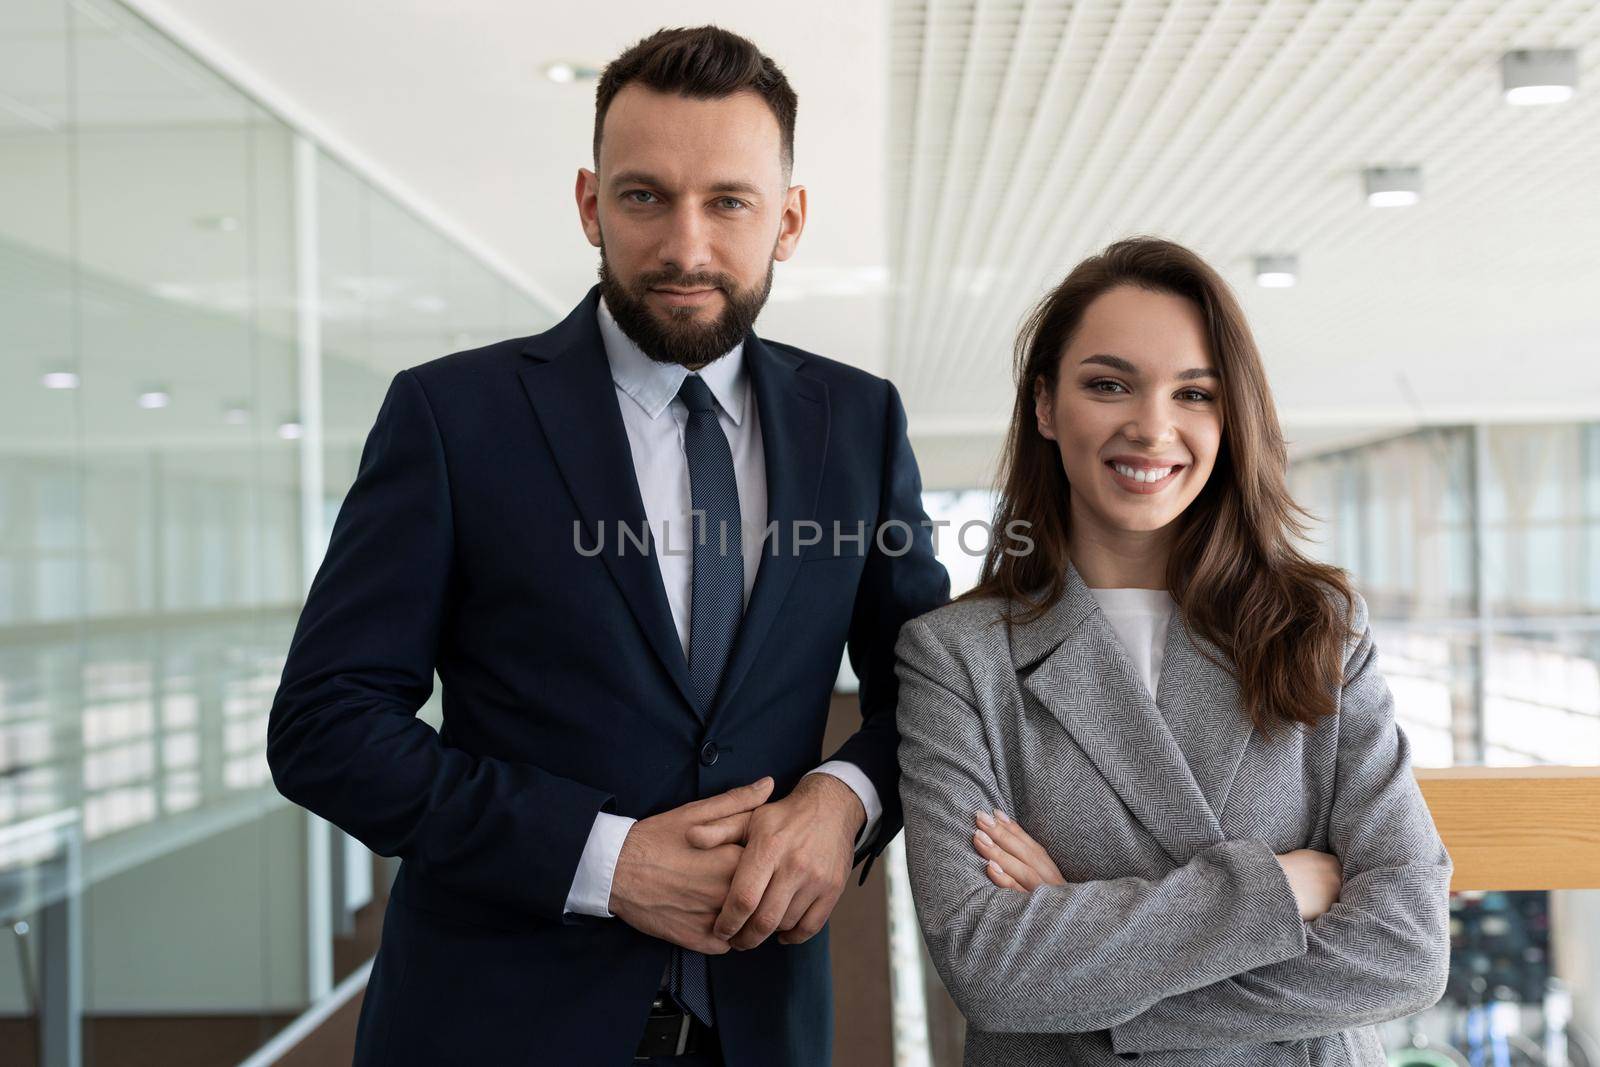 heterosexual company executives in business suits against the backdrop of a modern stylish office.